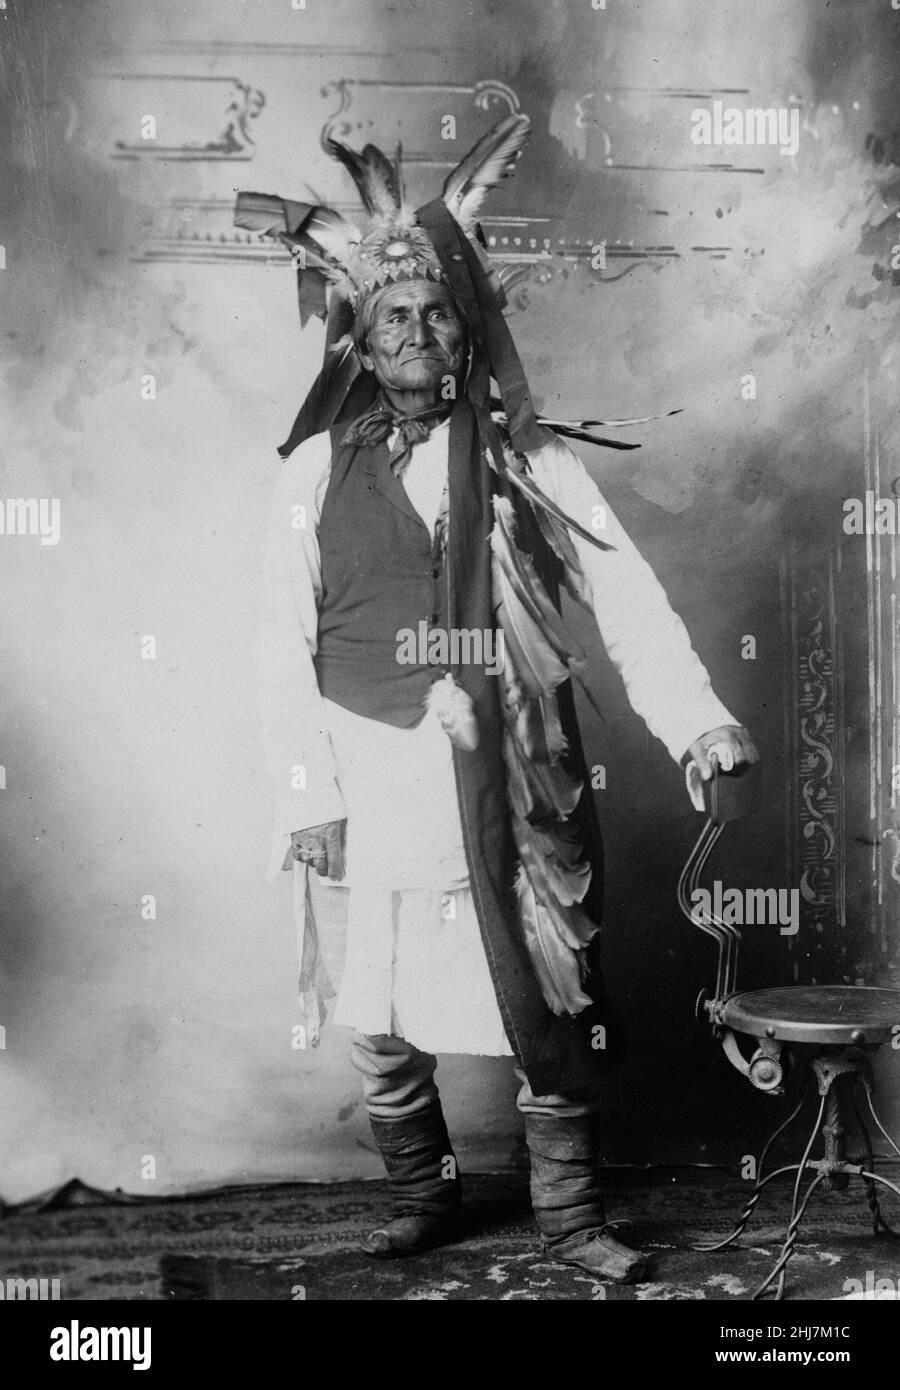 Geronimo - Apache war chief at the age of 78. Antique and vintage photo - Native american / Indian / American Indian. 1906. Photo by unknown. Stock Photo